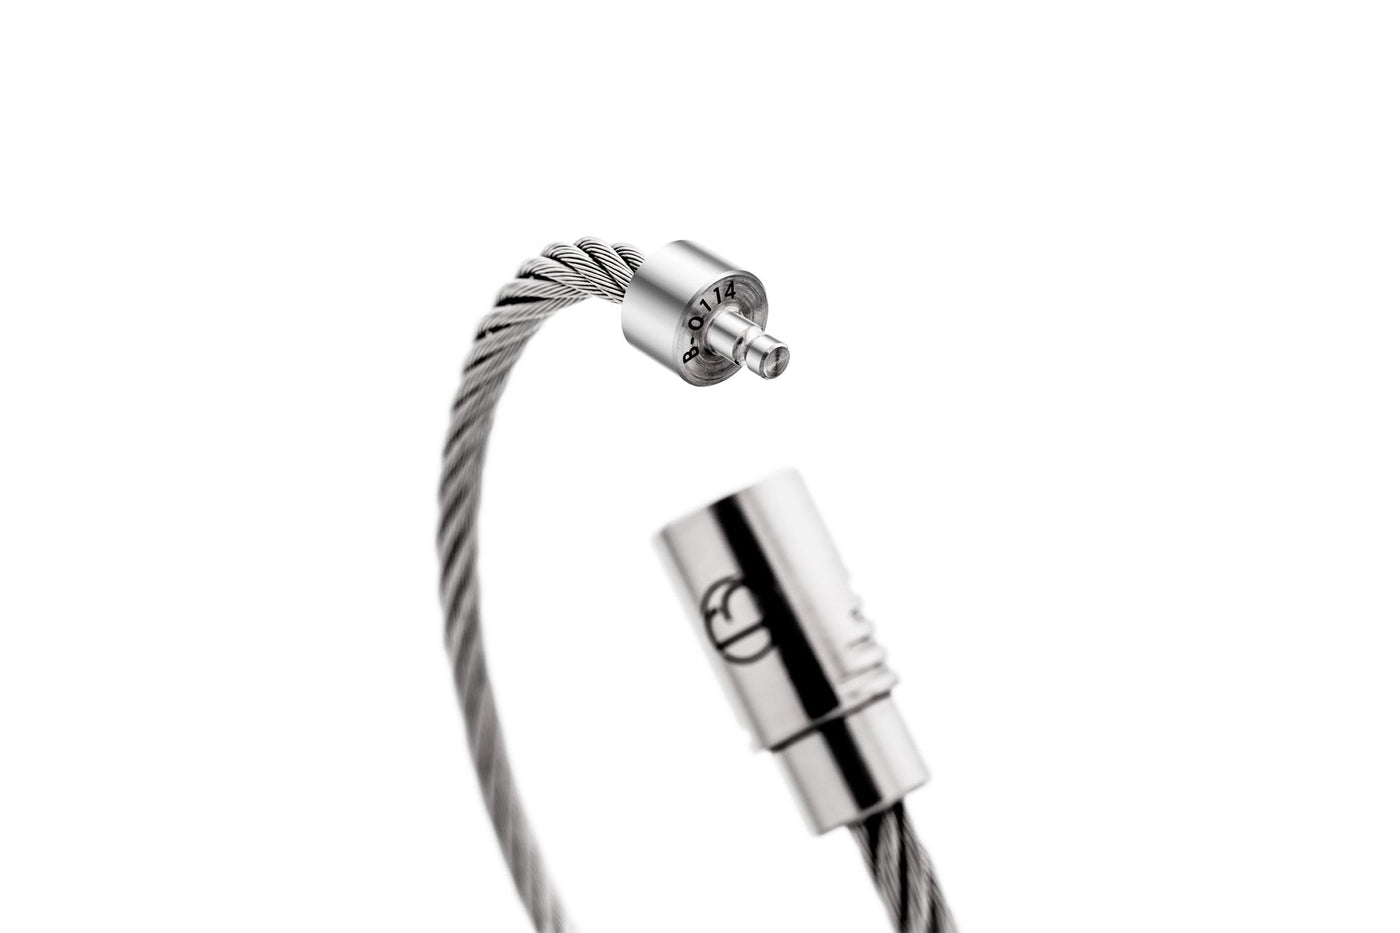 Fully Loaded CABLE Stainless Steel Bracelet V3 - Free Text Engraving*